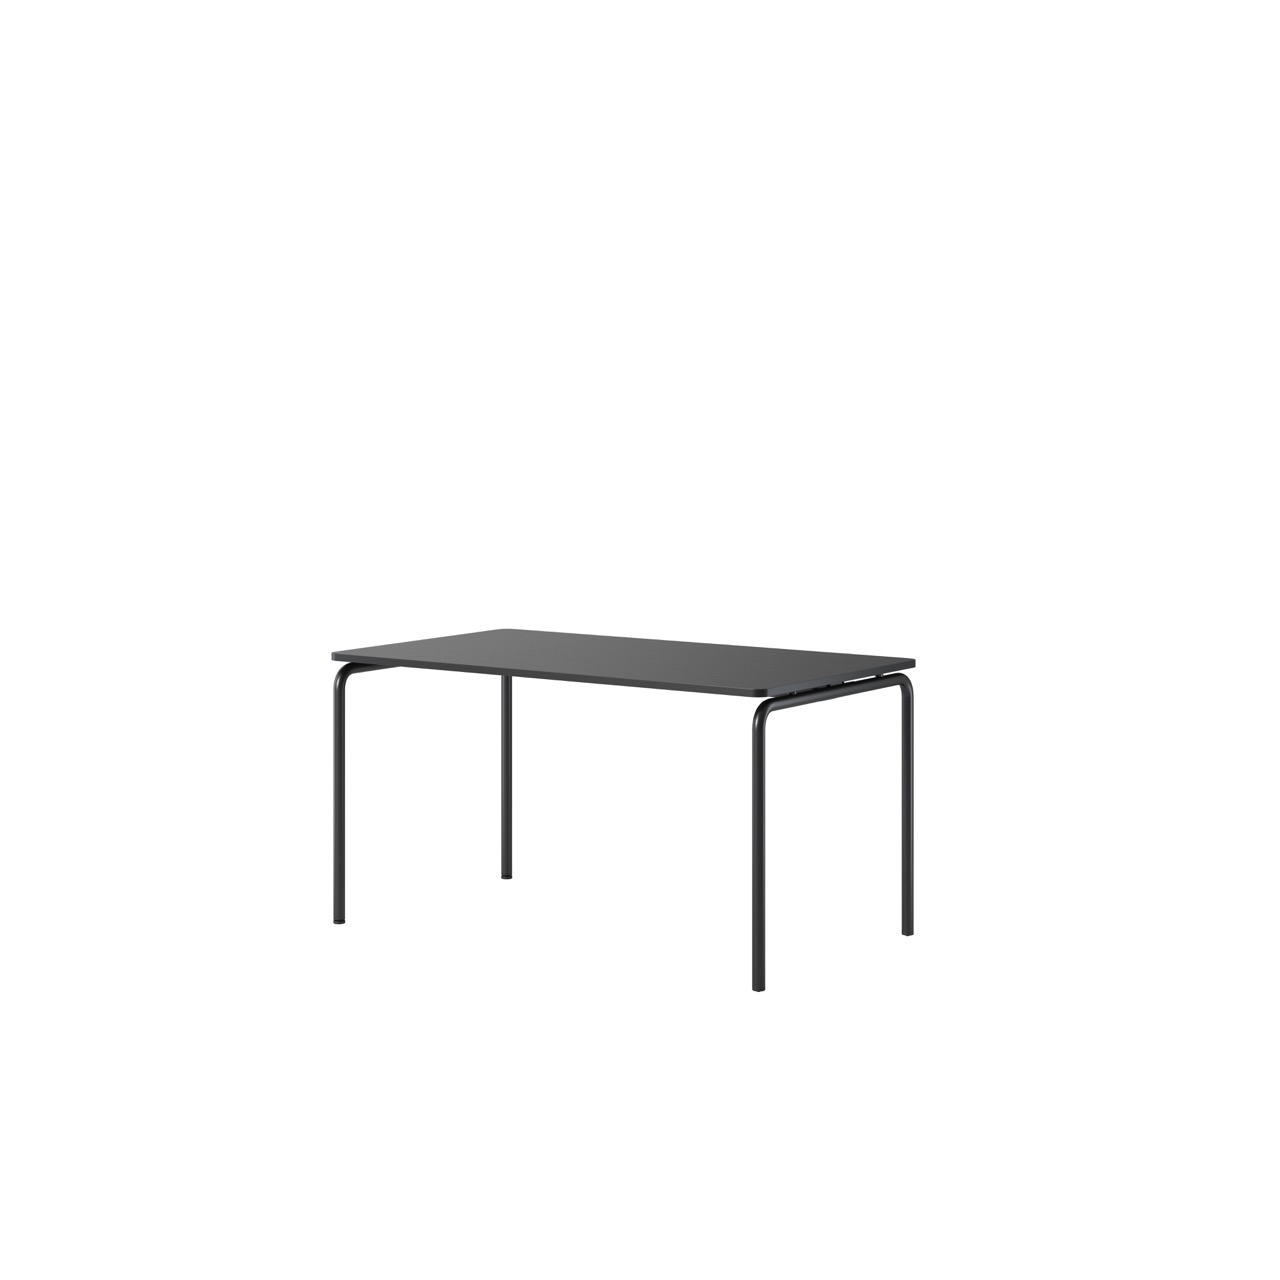 OCEE&FOUR - Tables - FourReal 74 - 140 x 80 - Straight - Packshot Image 2 Large